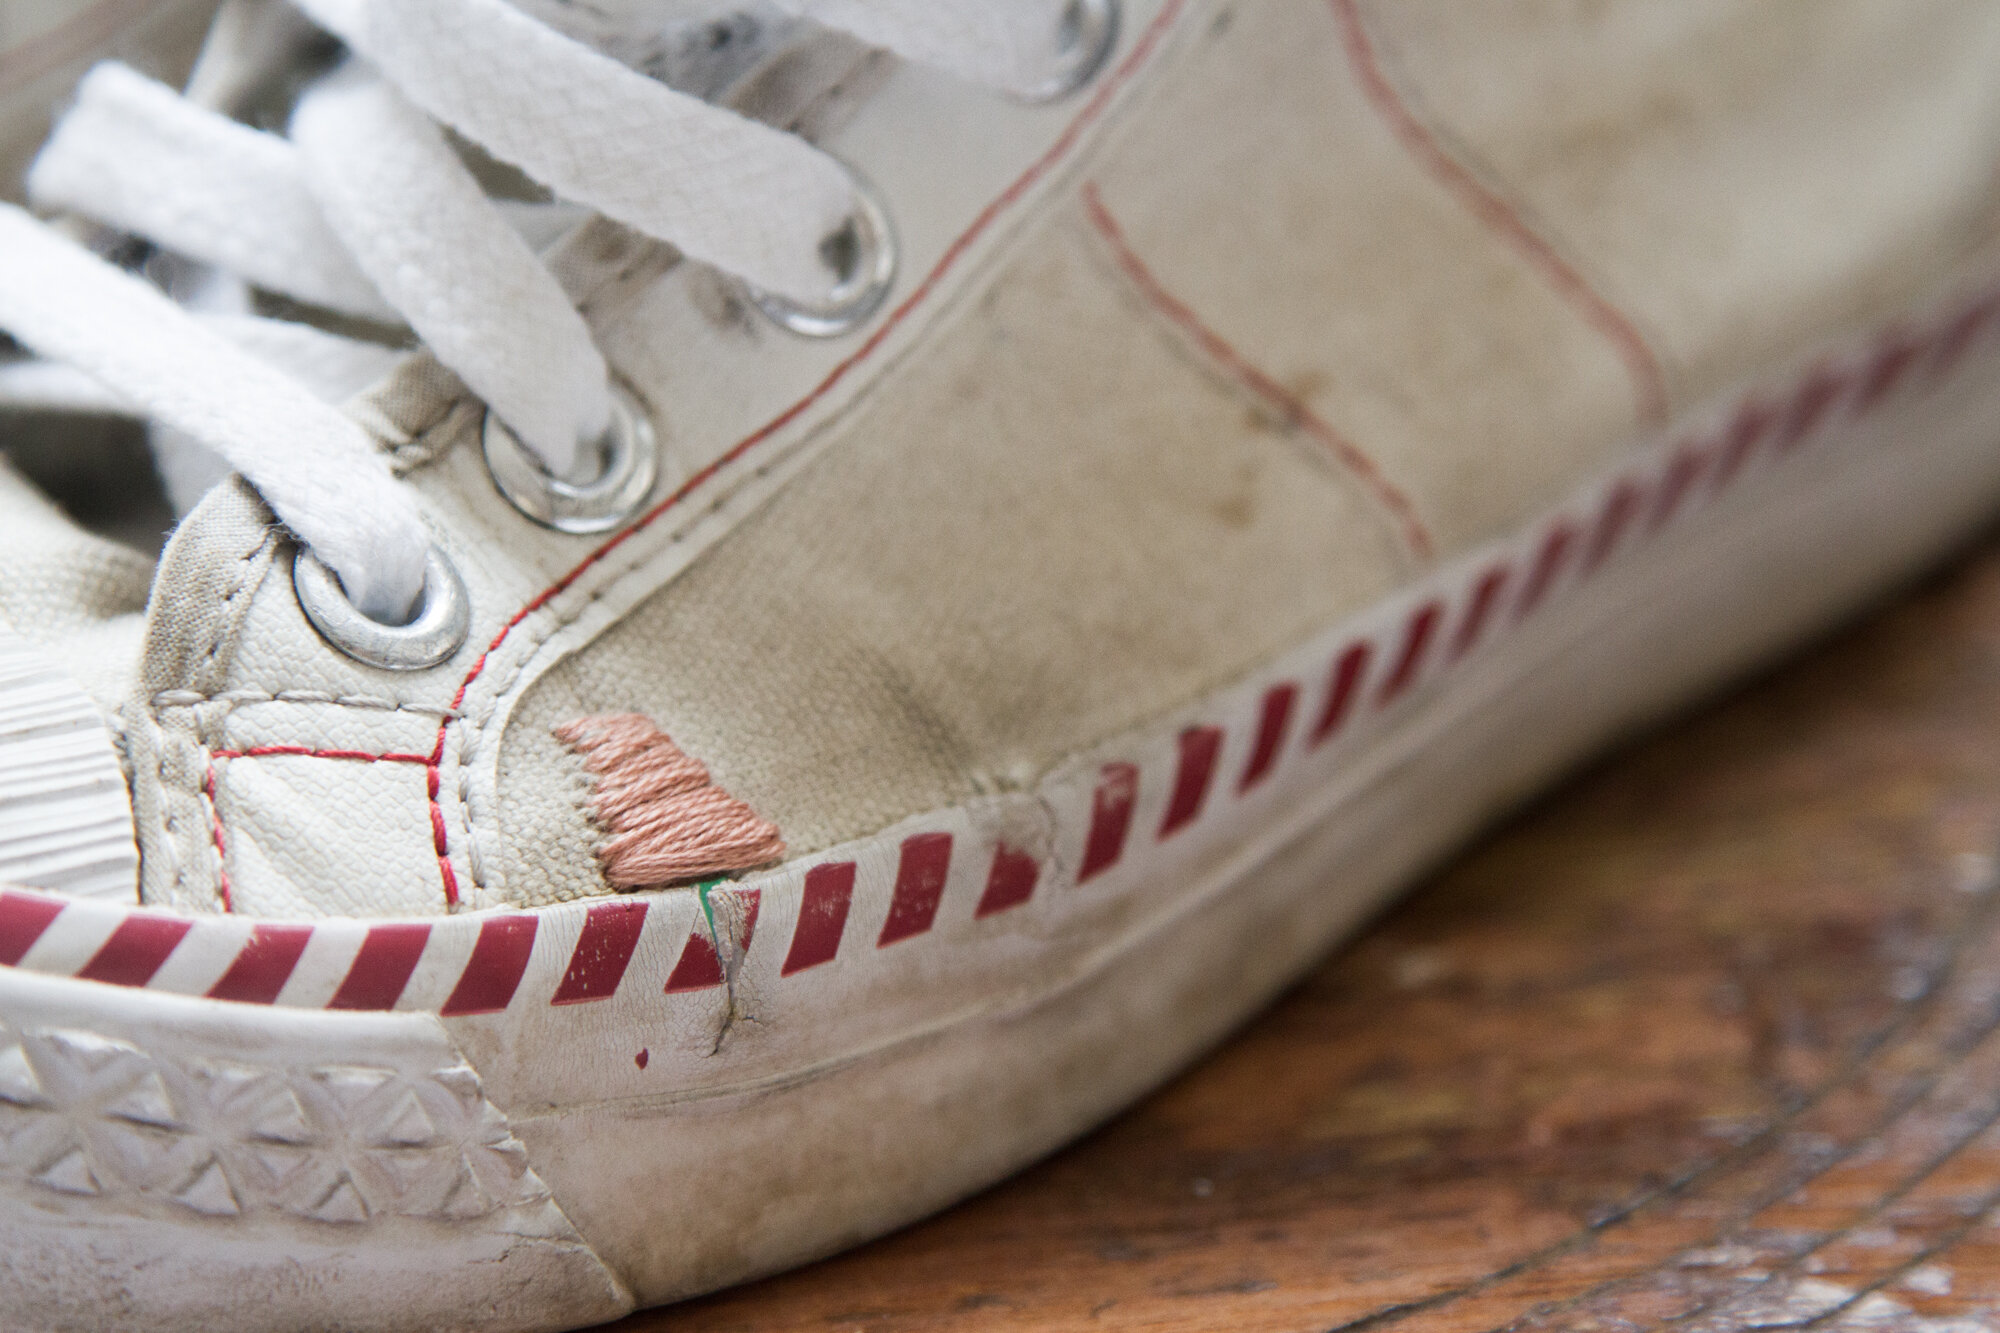 repaired canvas sneakers | reading my tea leaves